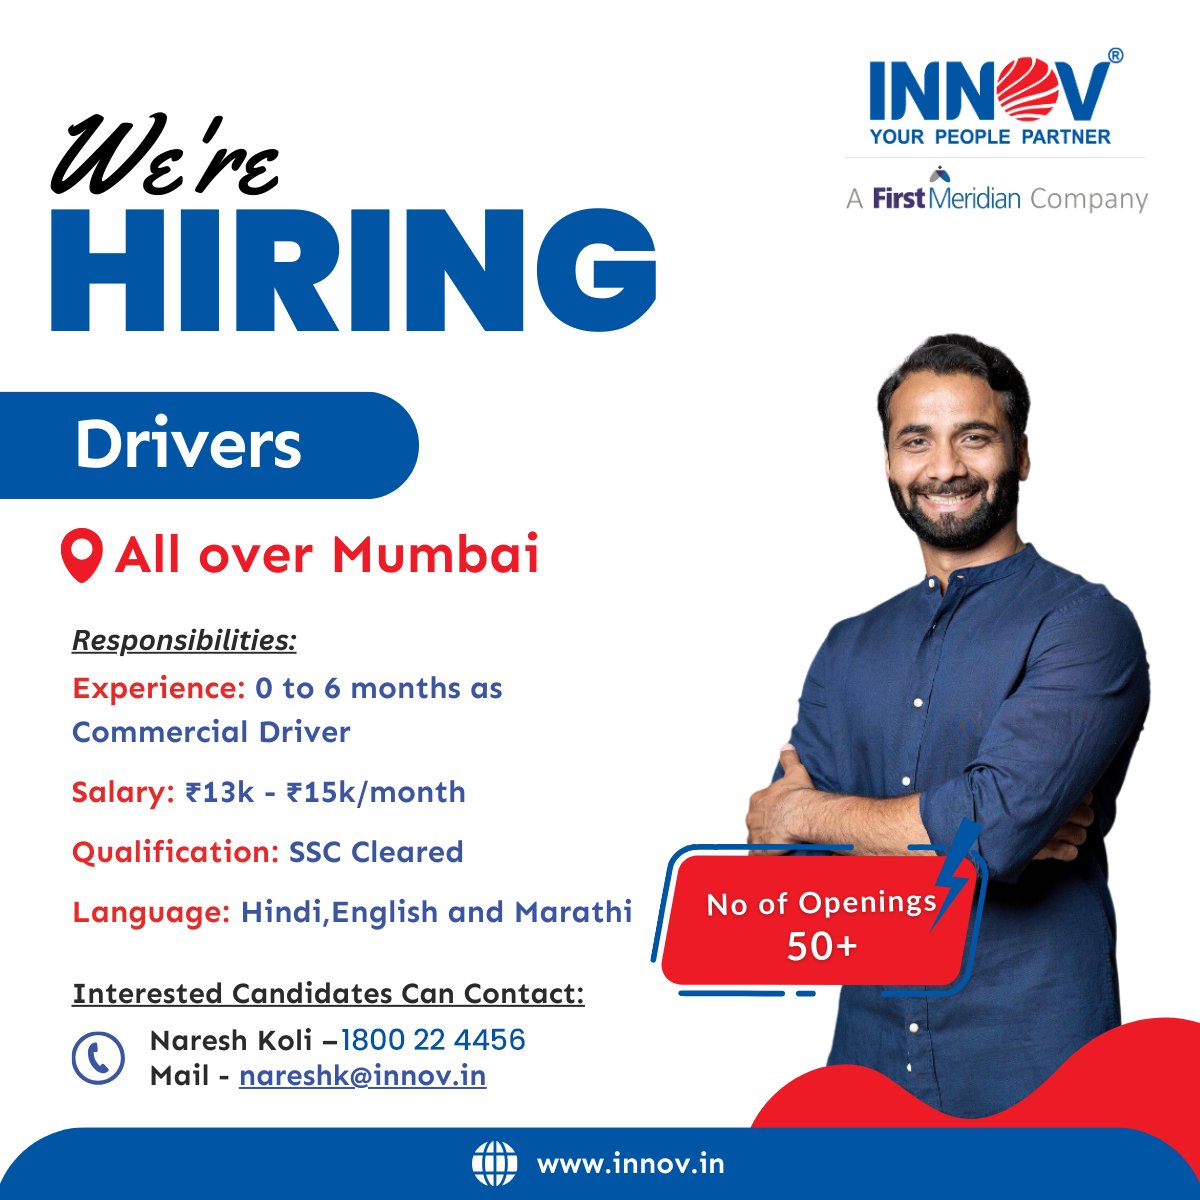 We are hiring Drivers.

If interested, visit innovsource.com or contact our HR team.

Note: Innovsource Does Not Charge Money for Job Offers.

#DriverJobs #JobsInIndia #JobsInMumbai
#FreshersJobs #WeAreHiring #Innovsource #Innov